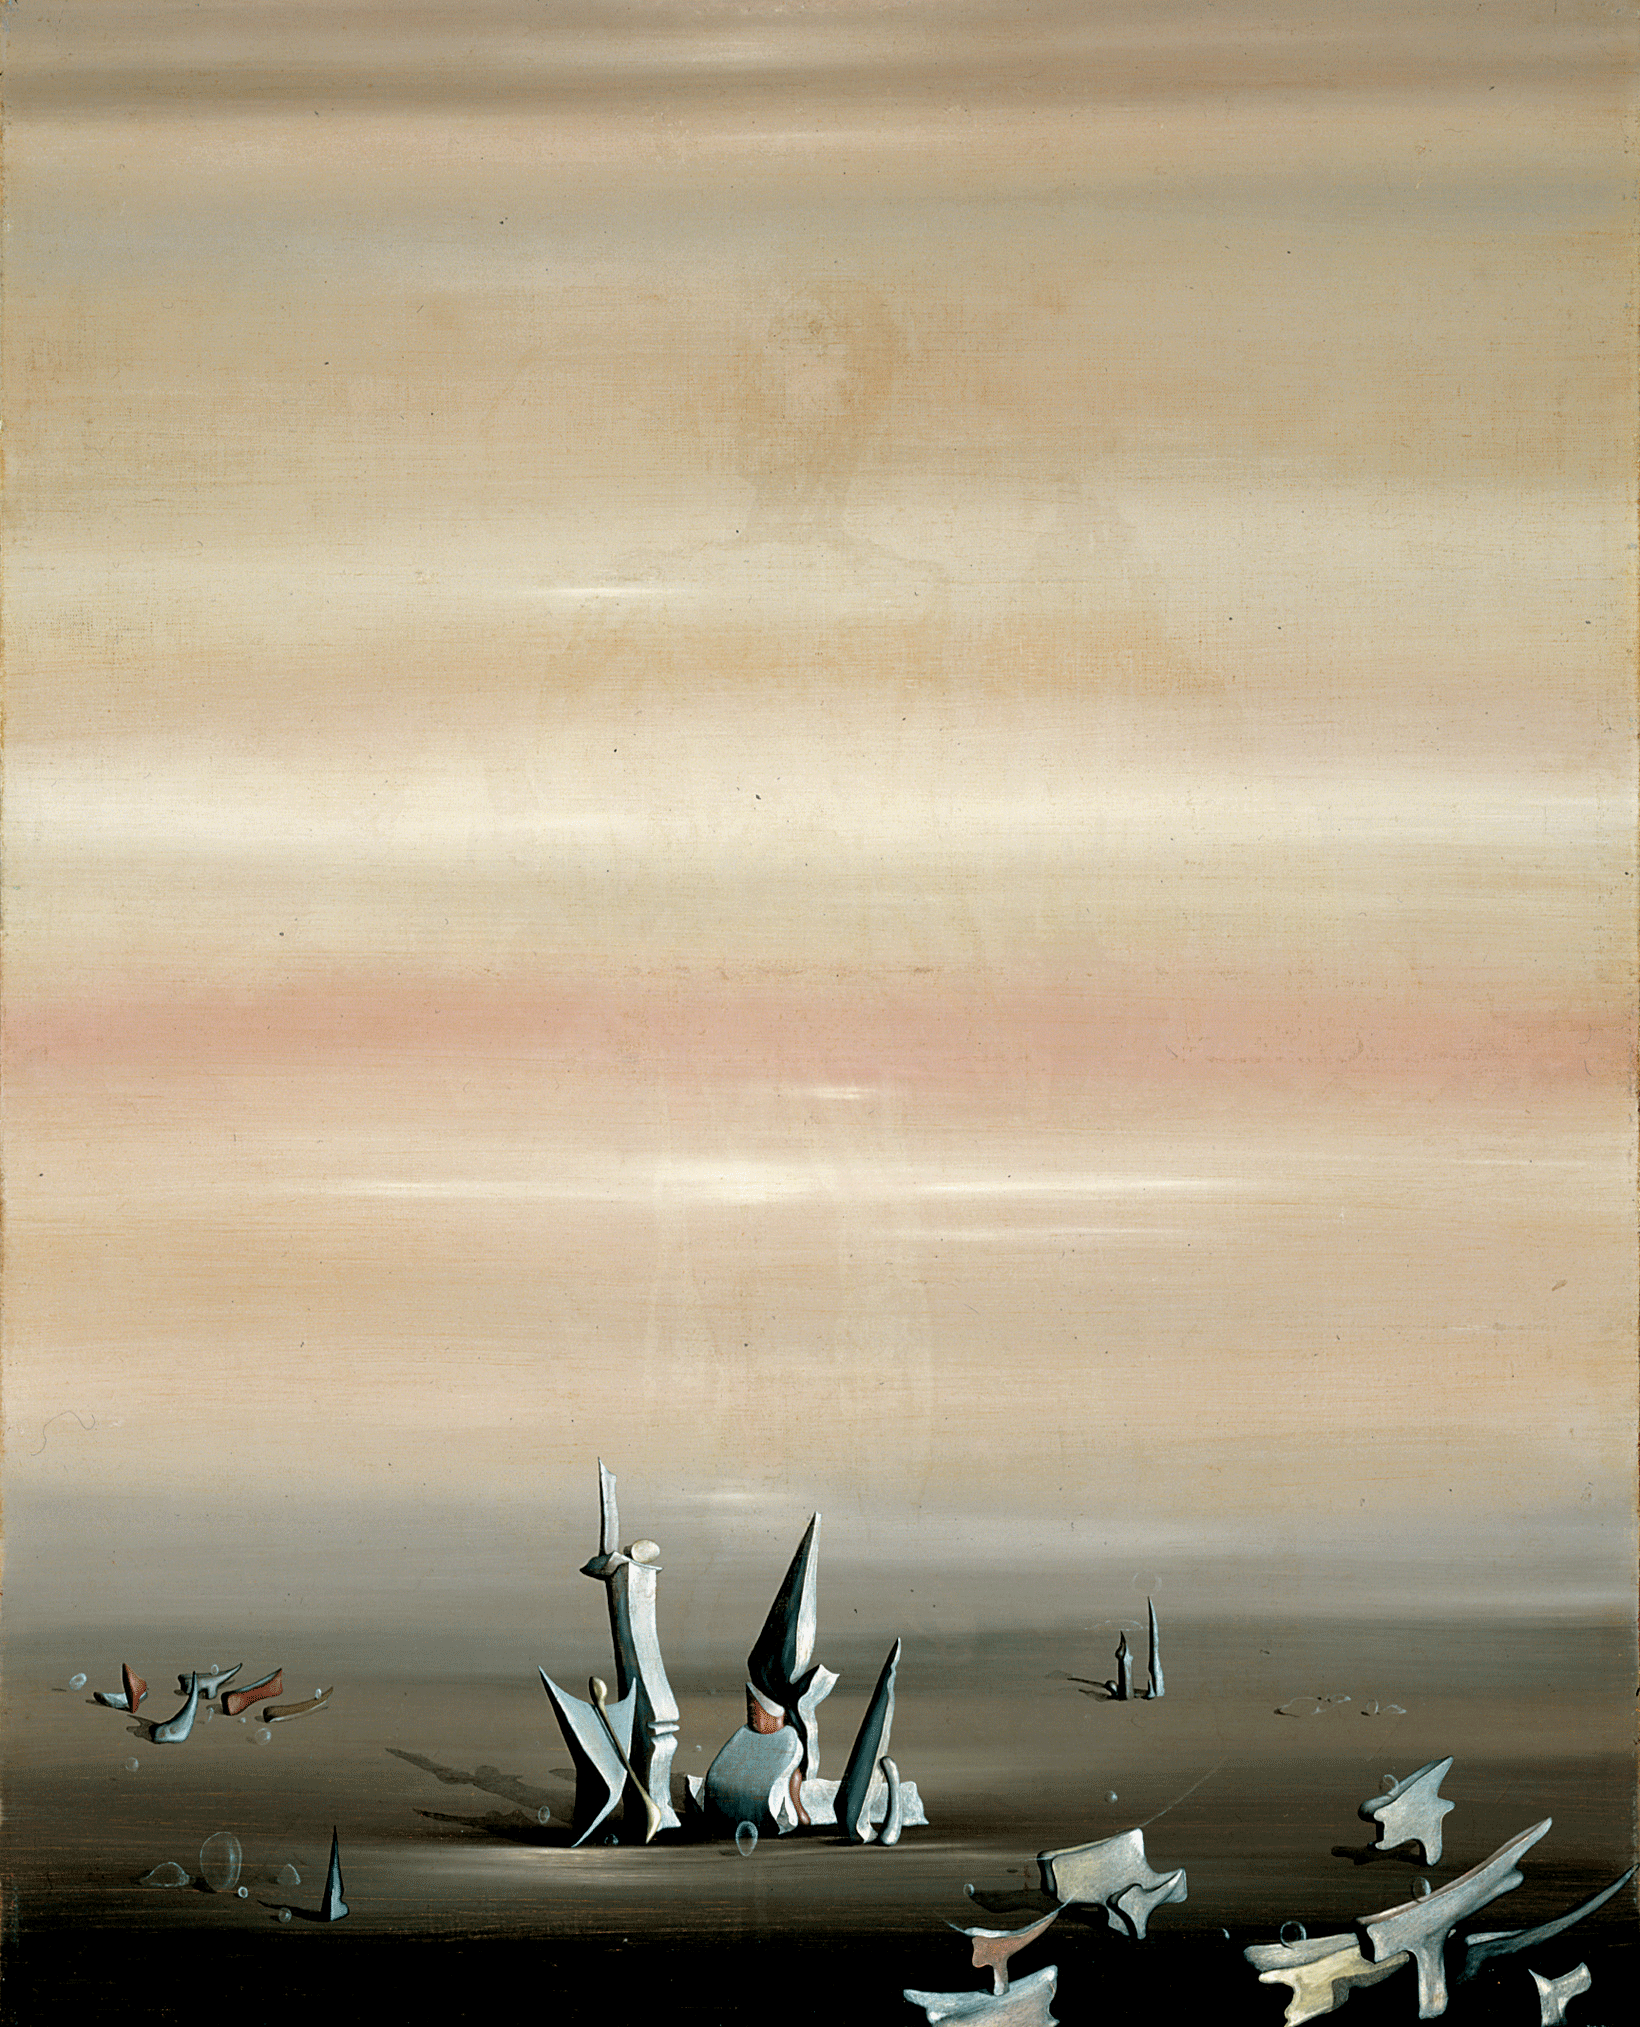 http://artdistricts.com/wp-content/uploads/2012/03/yves-tanguy.gif